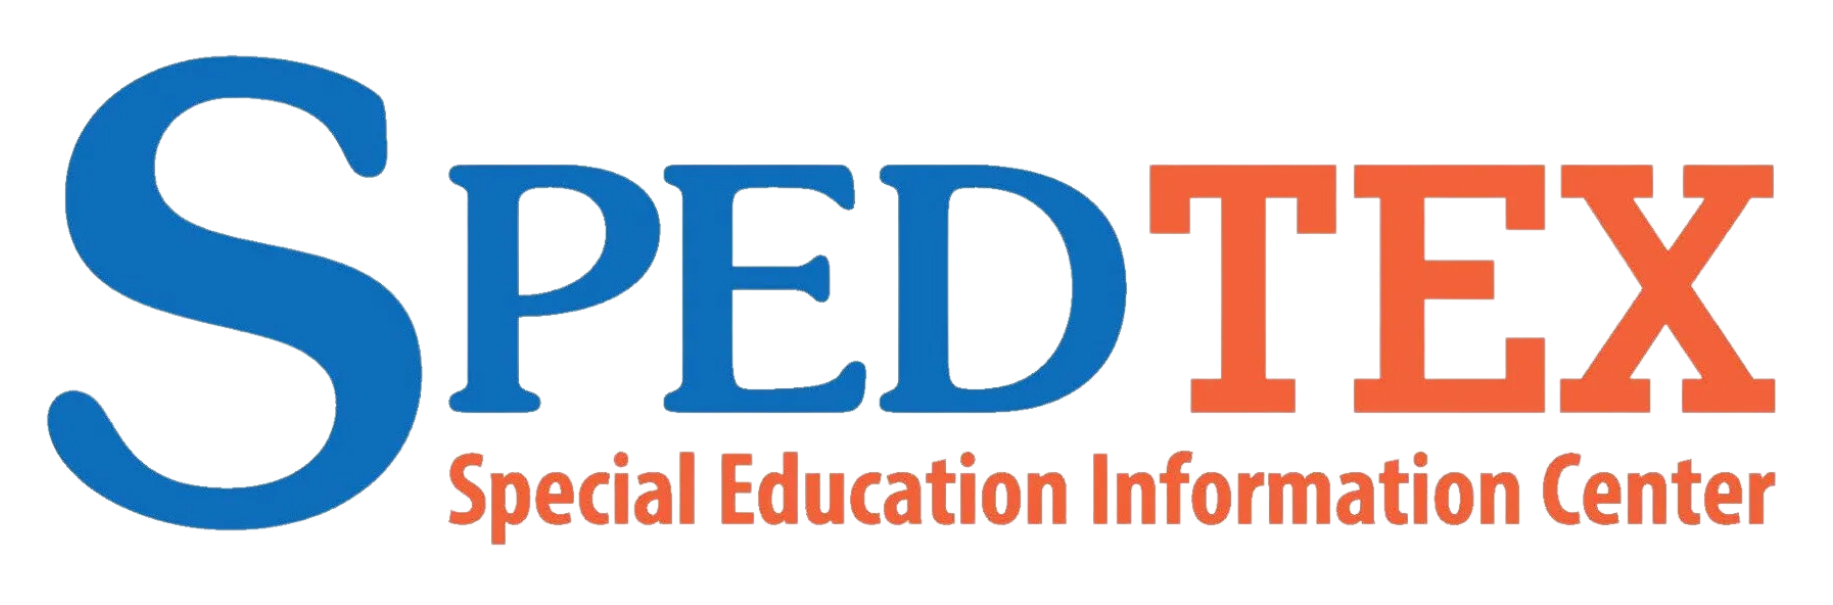 the logo for spedtex special education information center